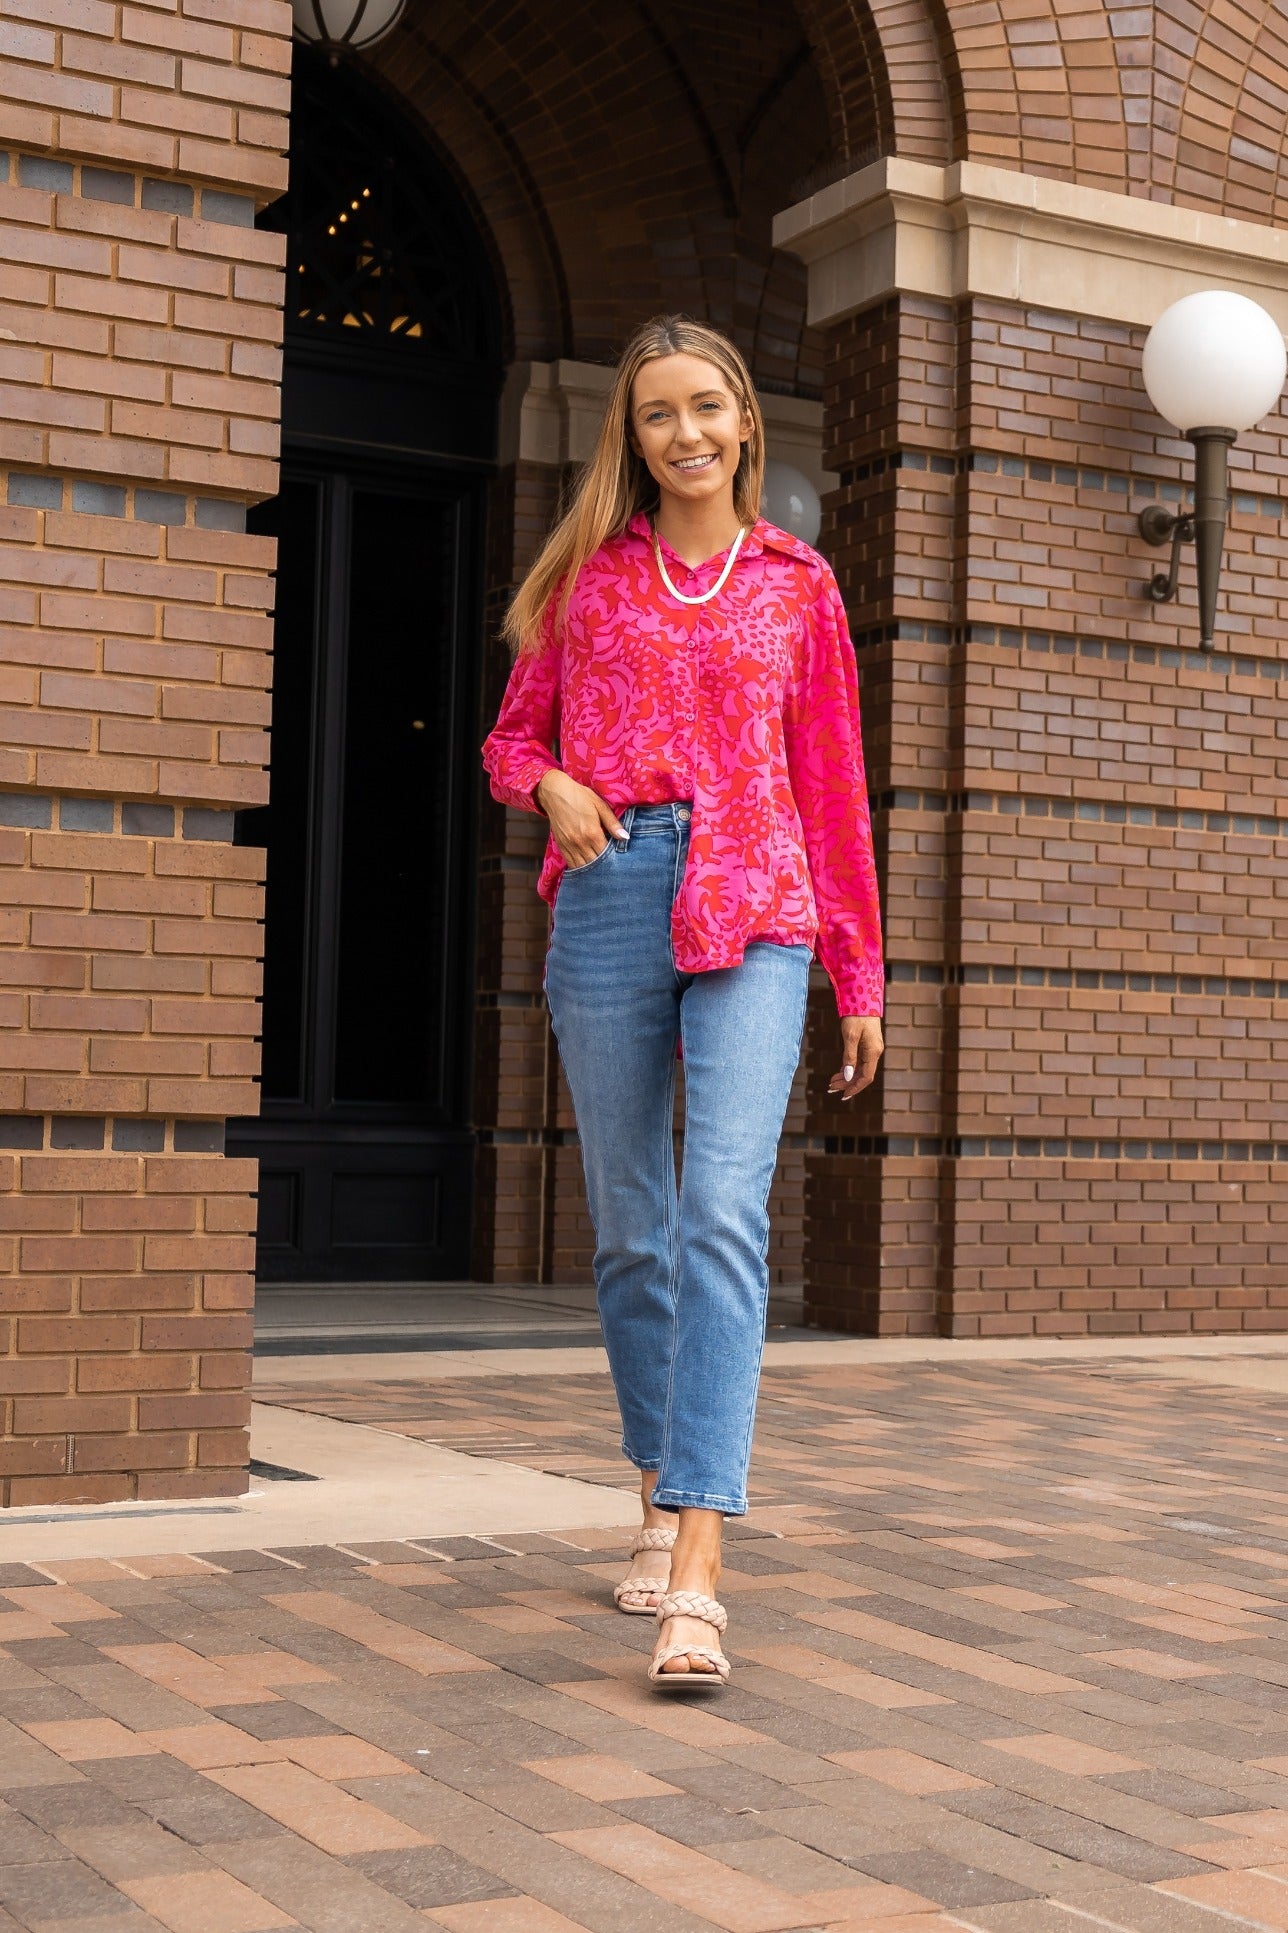 The Kathryn Hot Pink Abstract Floral Button Down Top